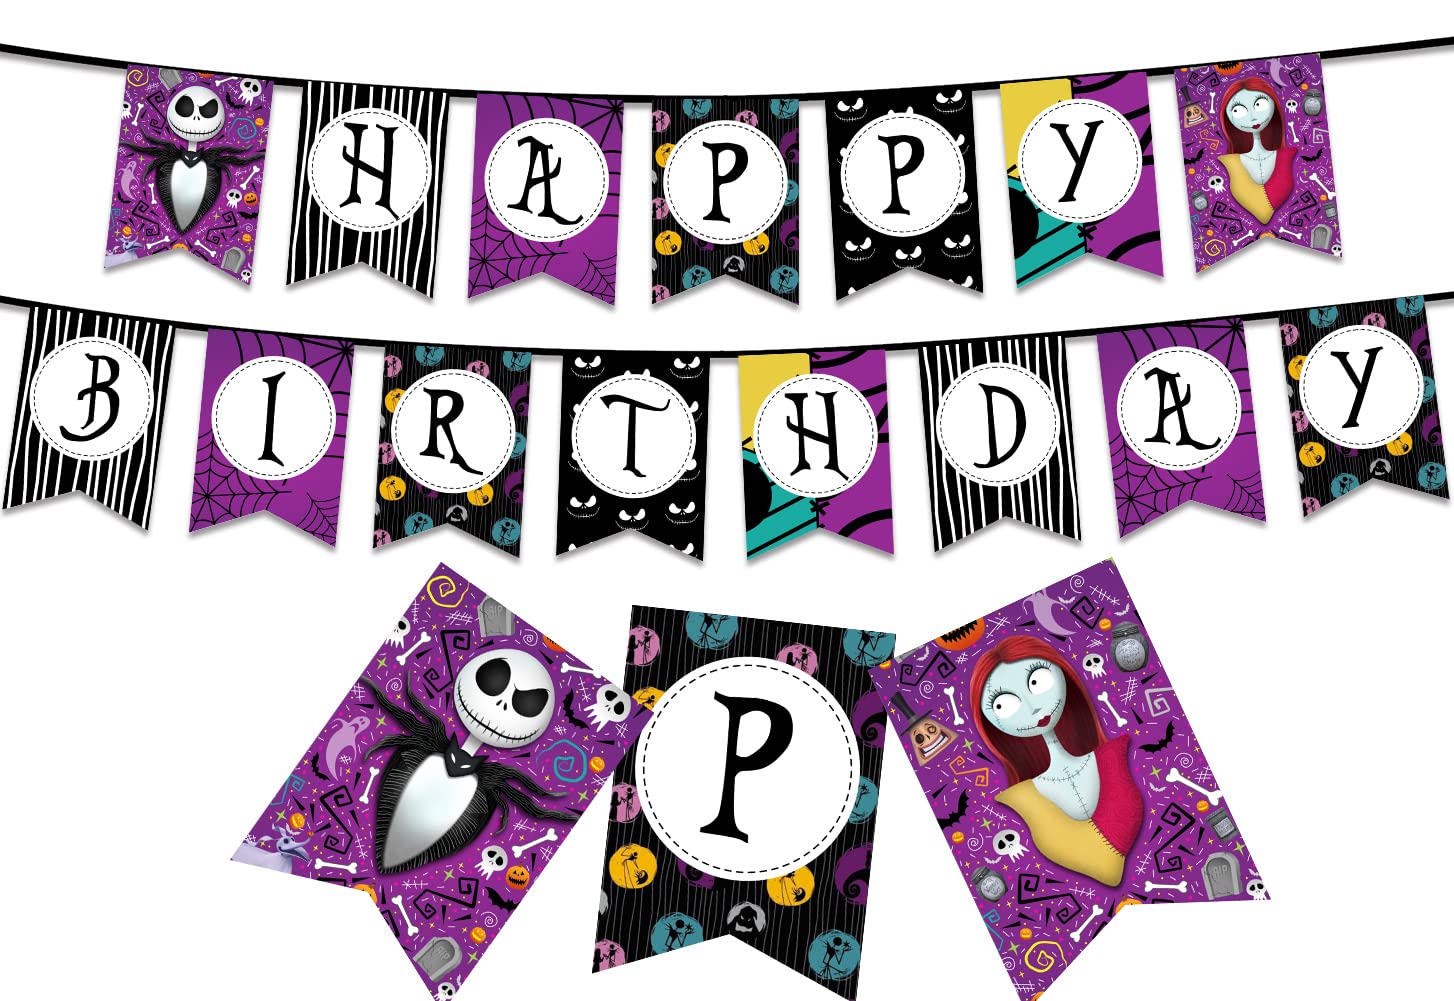 Nightmare Theme Birthday Banner Before Christmas Nightmare Birthday Party Decorations Supplies Jack Skellington and Sally Themed Birthday Banner for Kids Adults Birthday Party Indoor Outdoor Decors